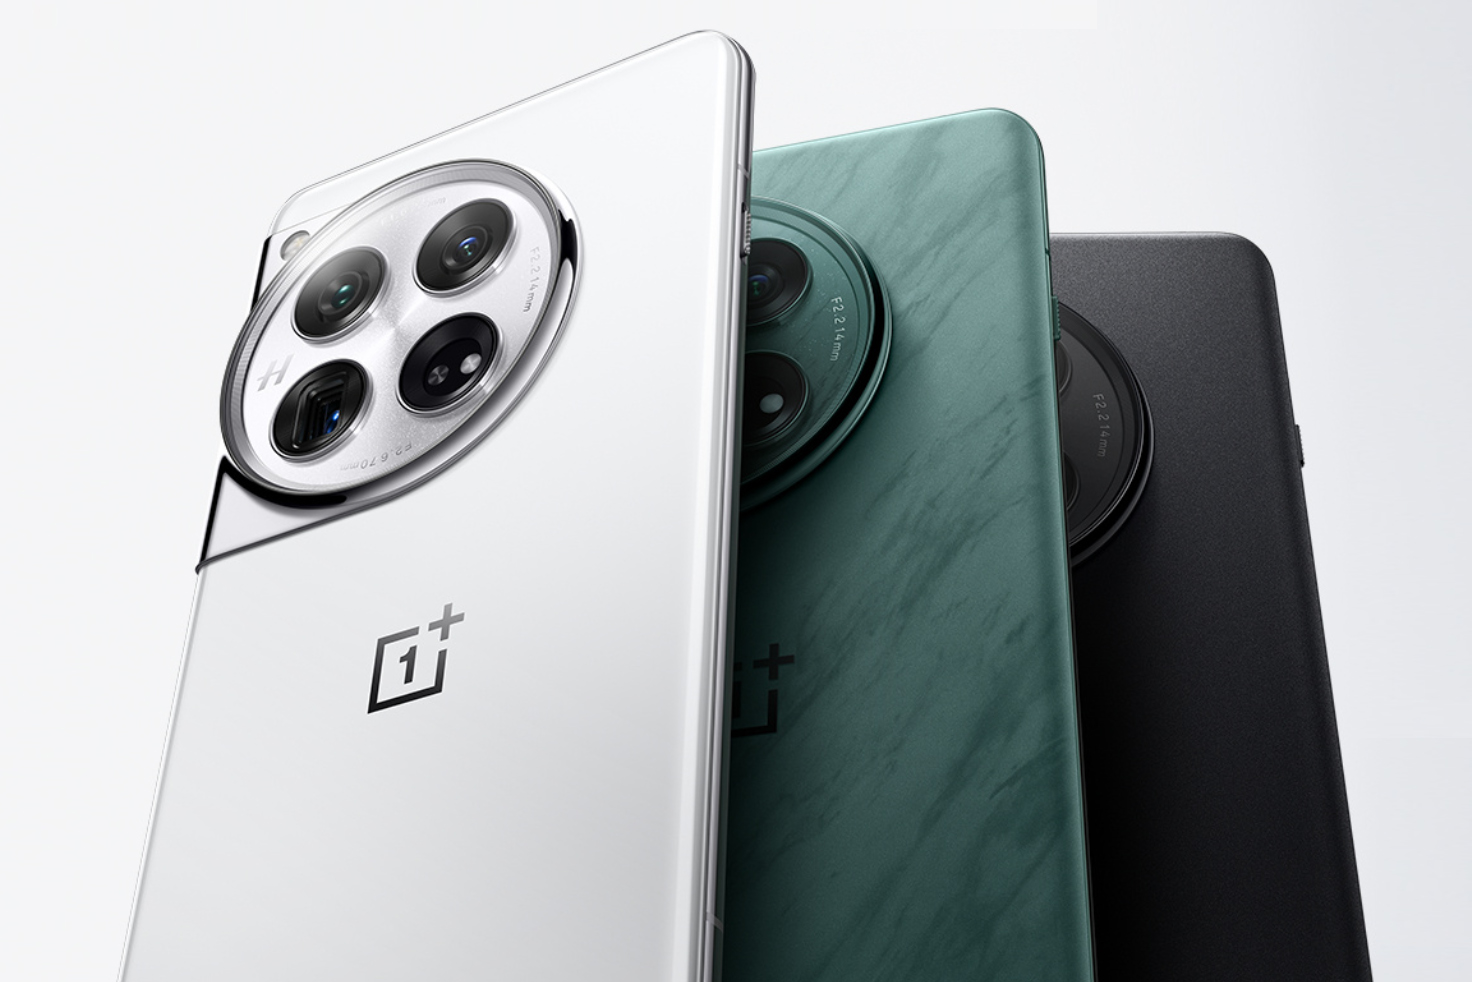 OnePlus 12 in green, silver, and black colors.